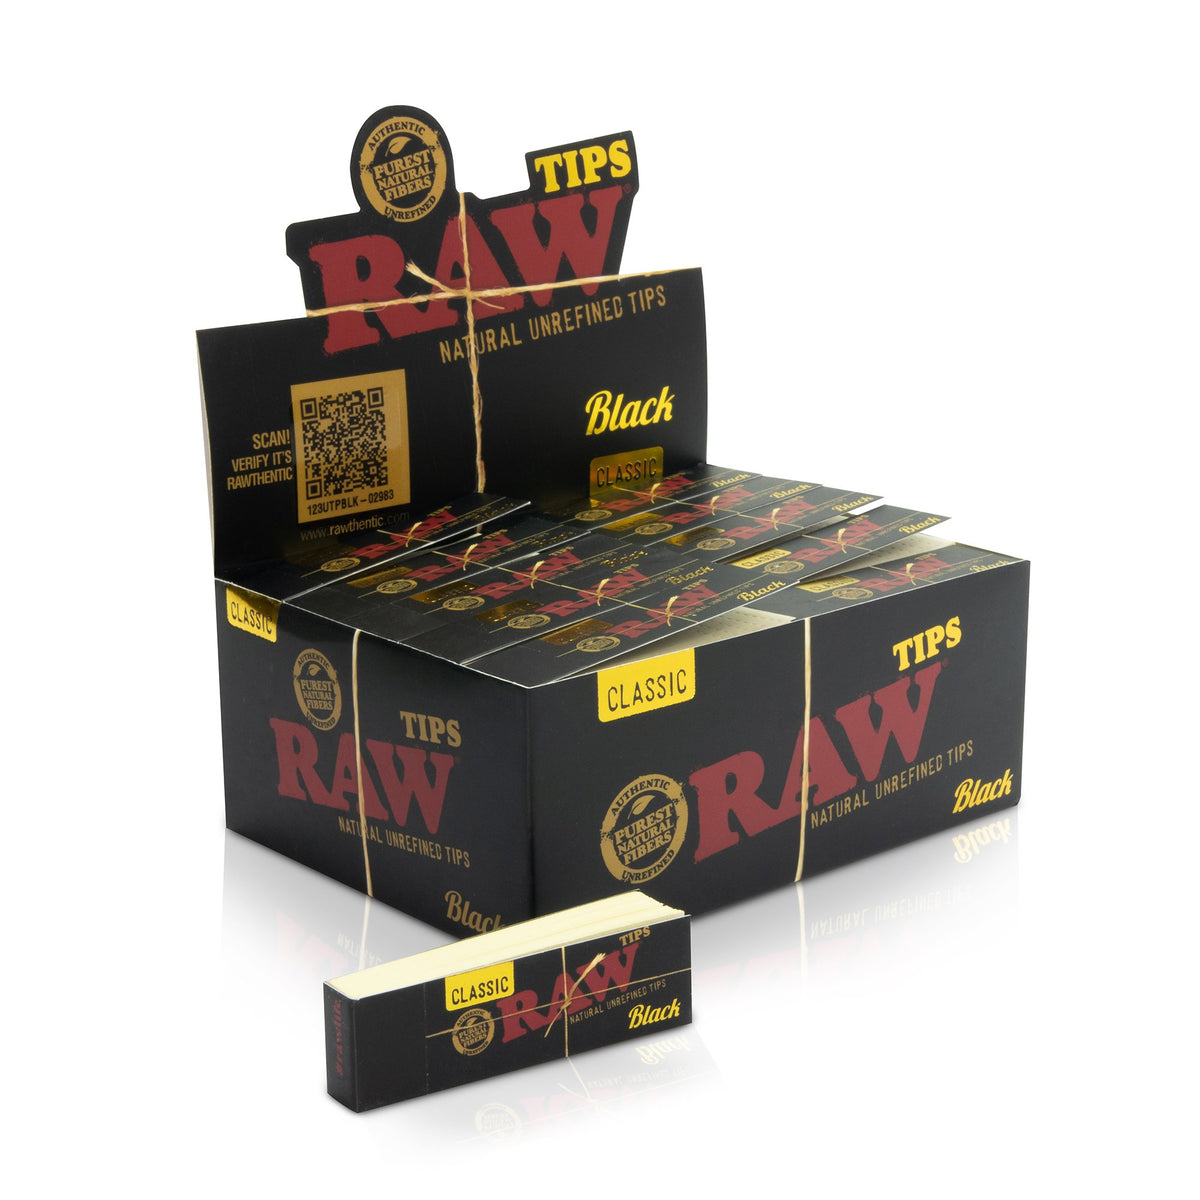 RAW Black Classic Tips Rolling Tips WAR00255-MUSA01 esd-official